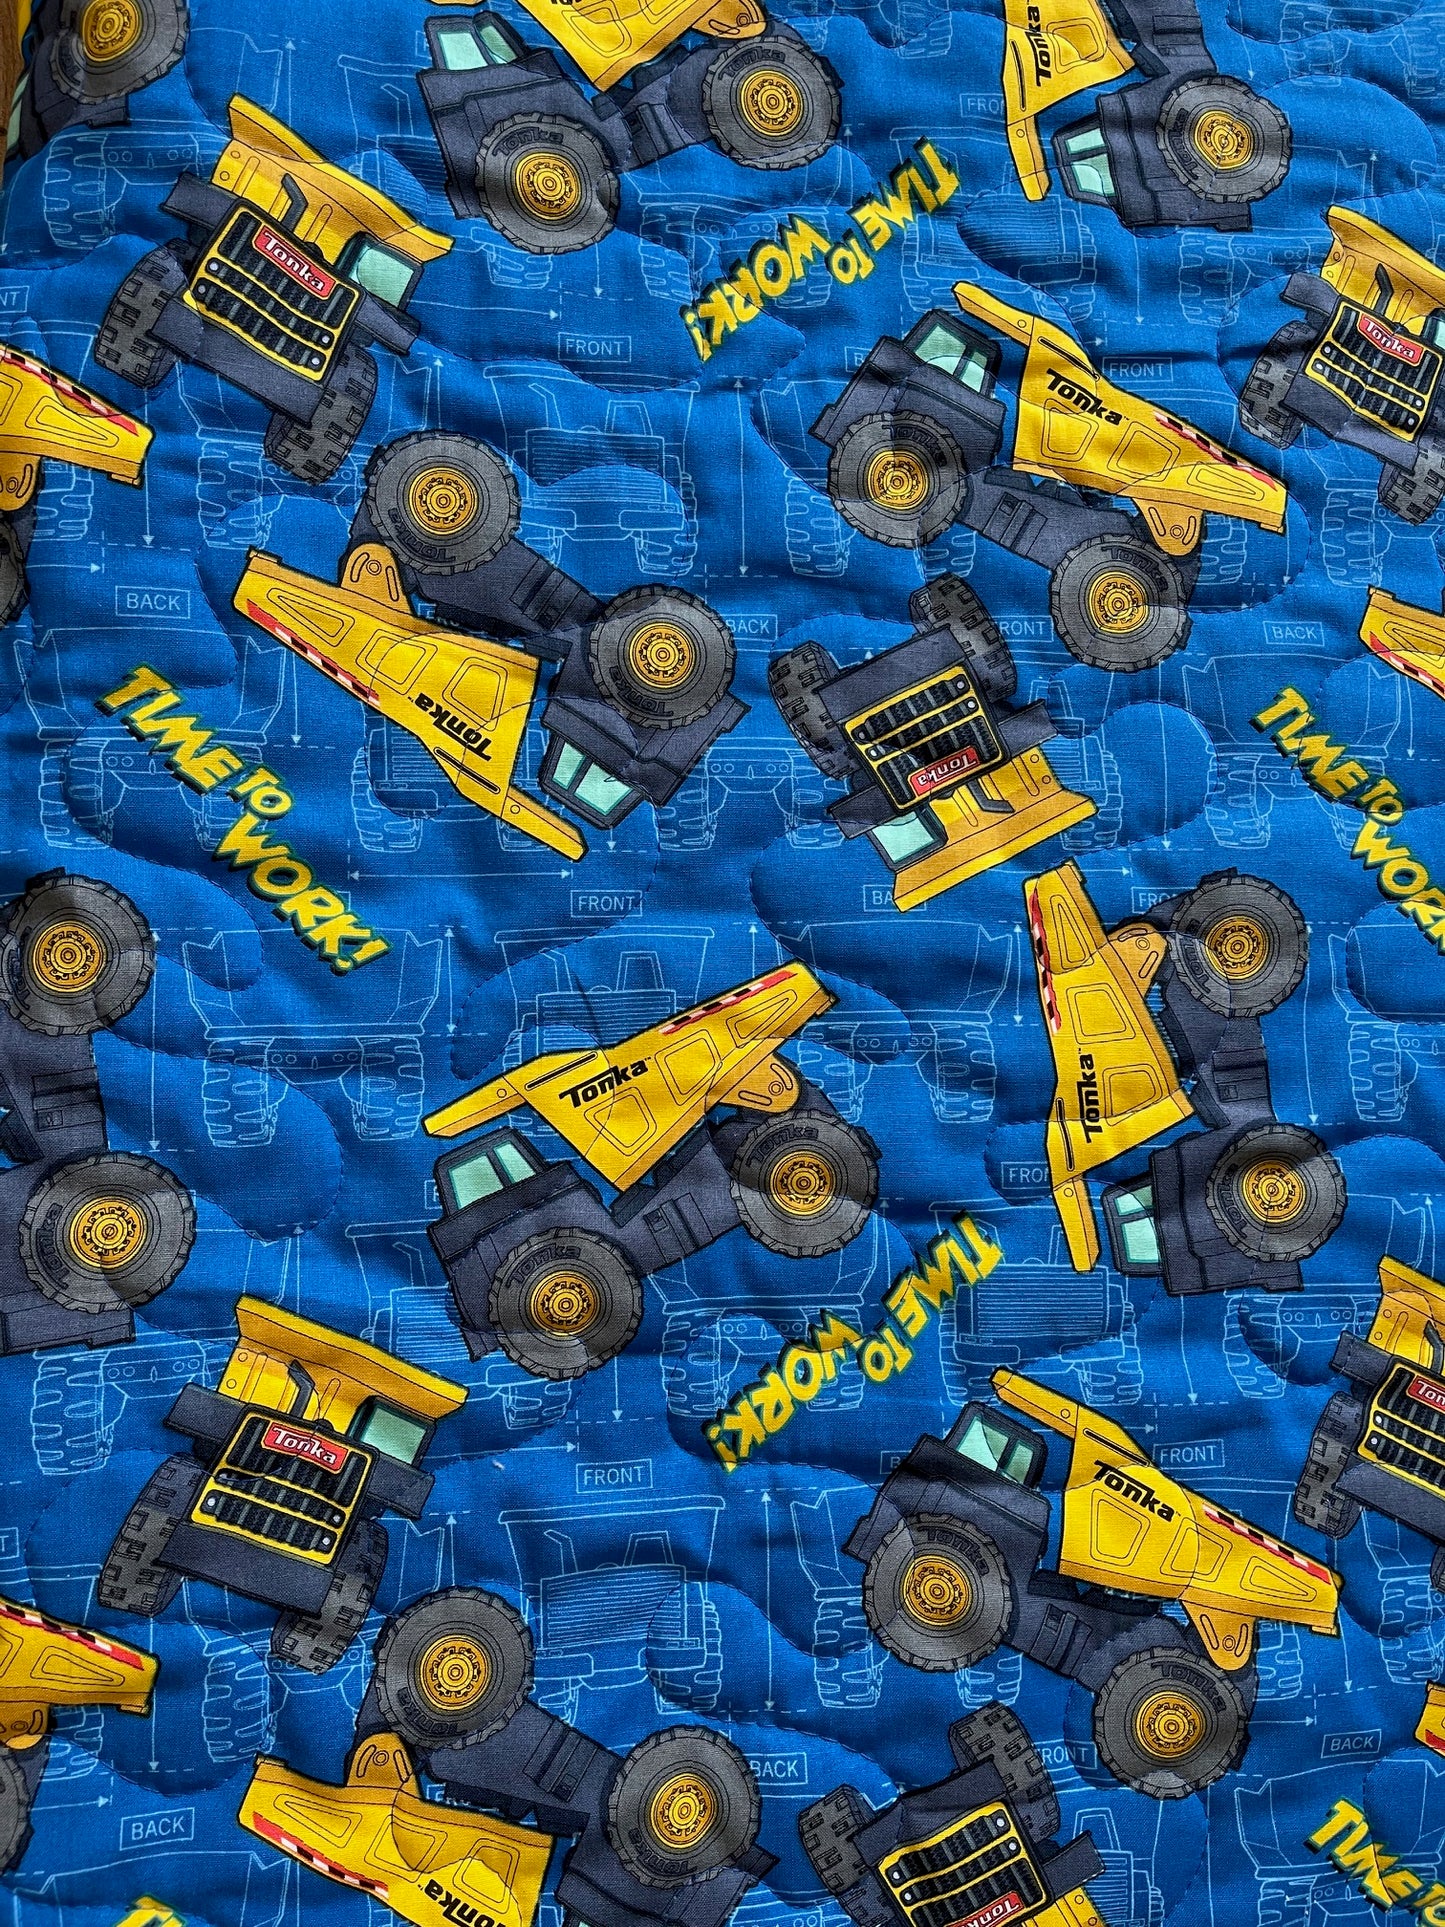 TONKA DUMP TRUCK 100% TOUGH 36"X44" "TIME TO WORK" QUILTED BLANKET